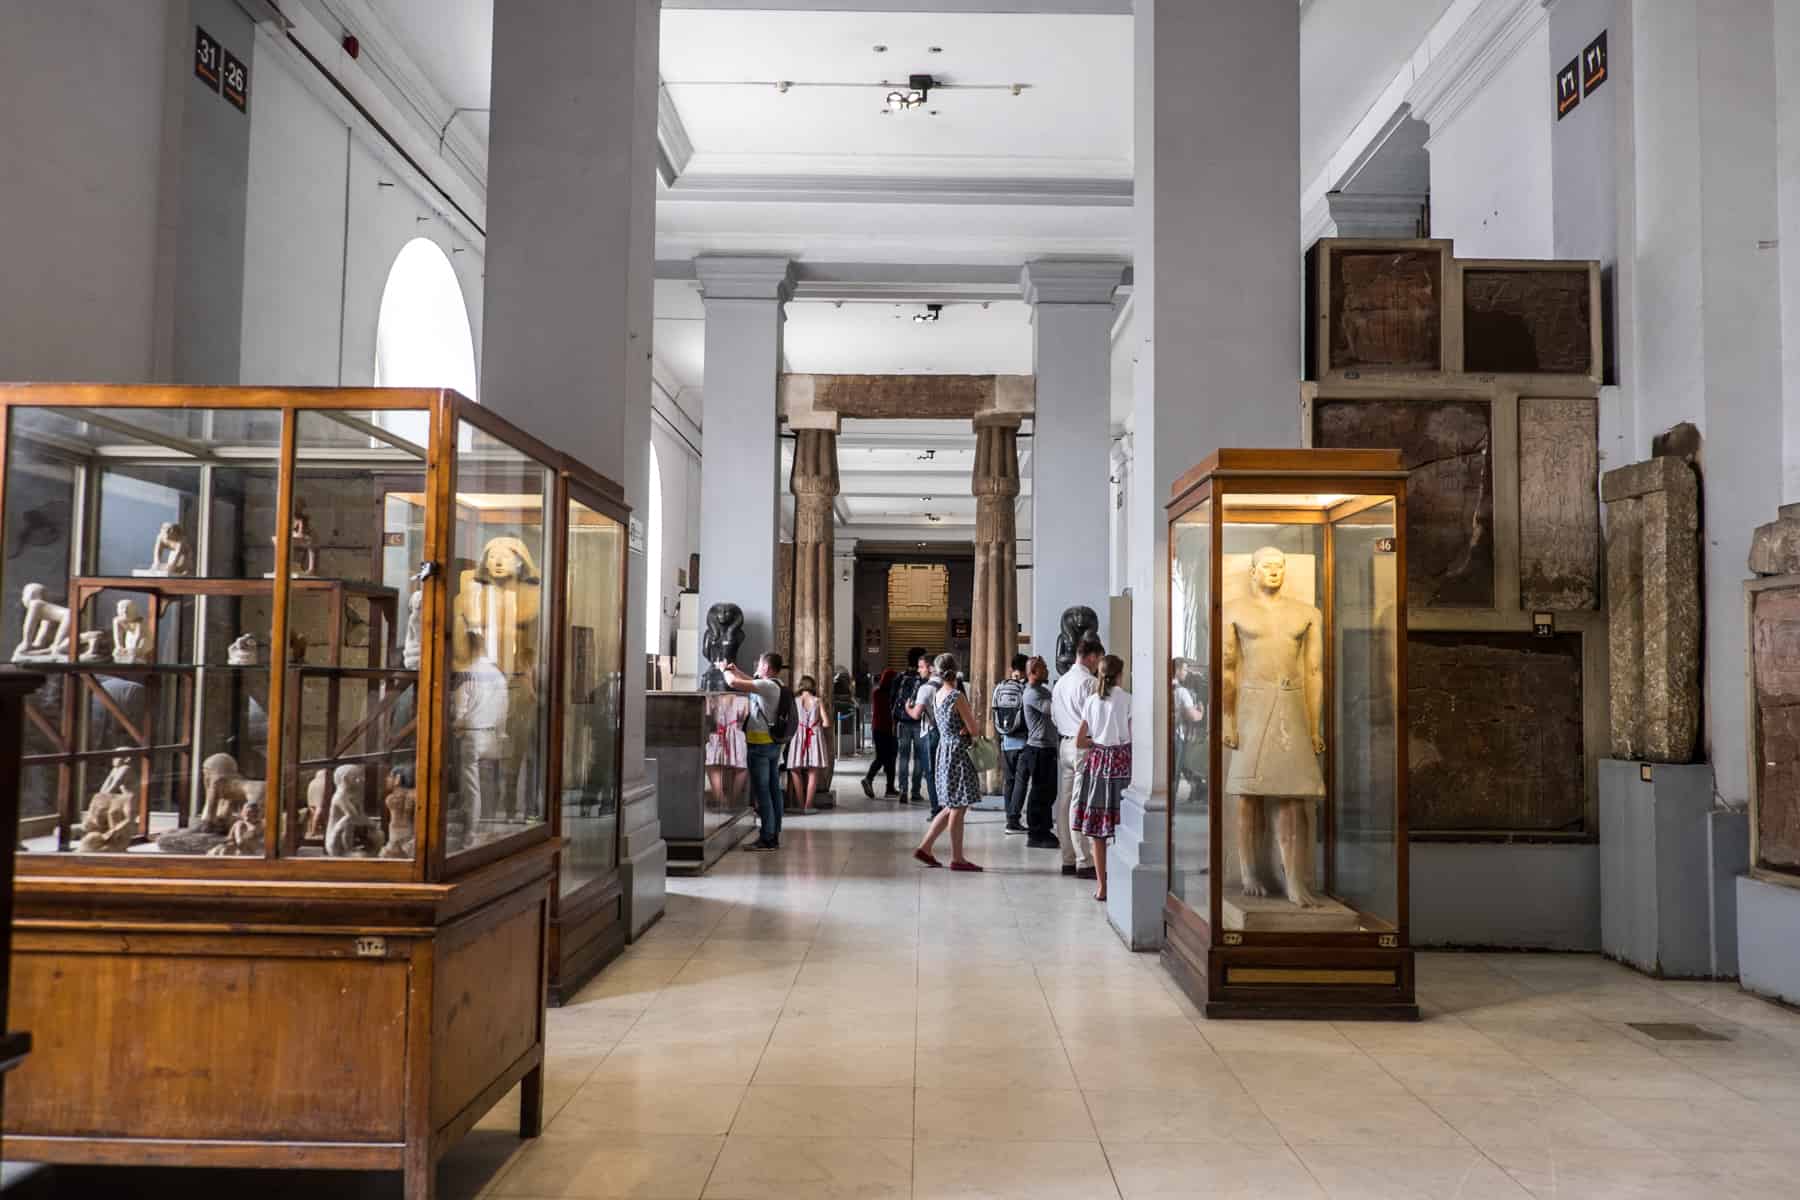 Artefacts in Large wooden and glass exhibits line the tall, wide corridors of the Egyptian Museum in Cairo Egypt